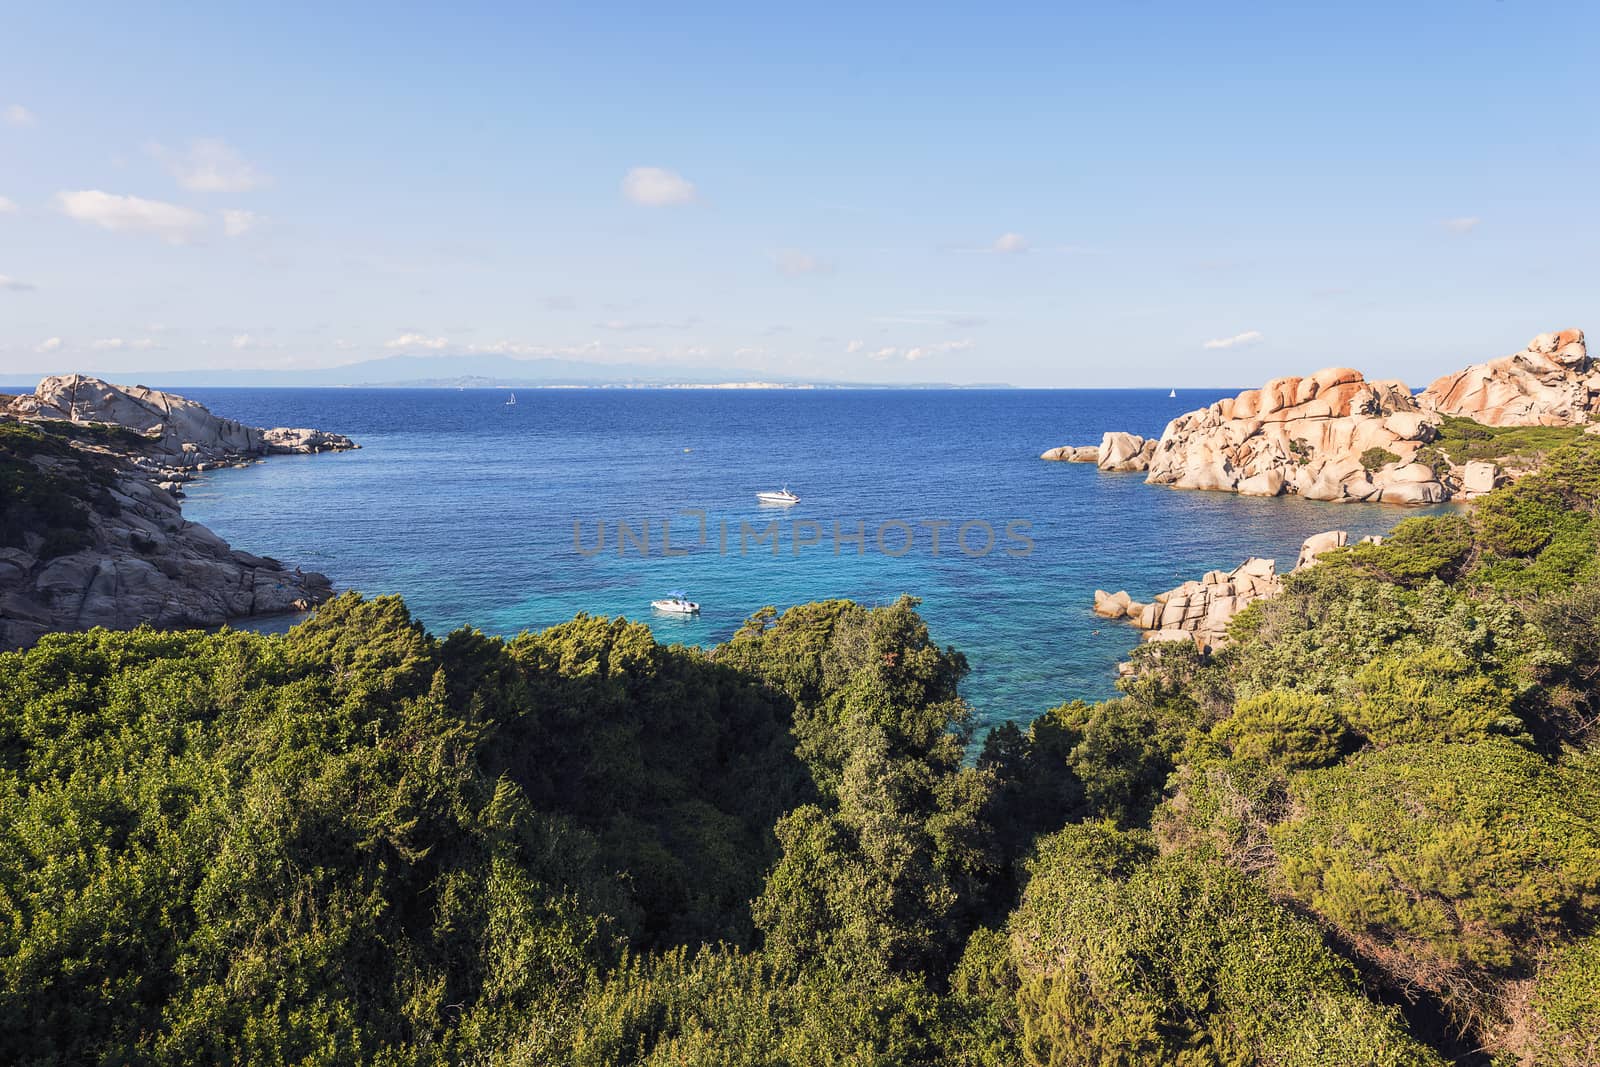 panoramic view of a cove with anchored boats. Vegetation and rocks surround it, scenic place for vacationers and summer holidays, bright colors. Capo Testa, Santa Teresa di Gallura, Sardinia, Italy